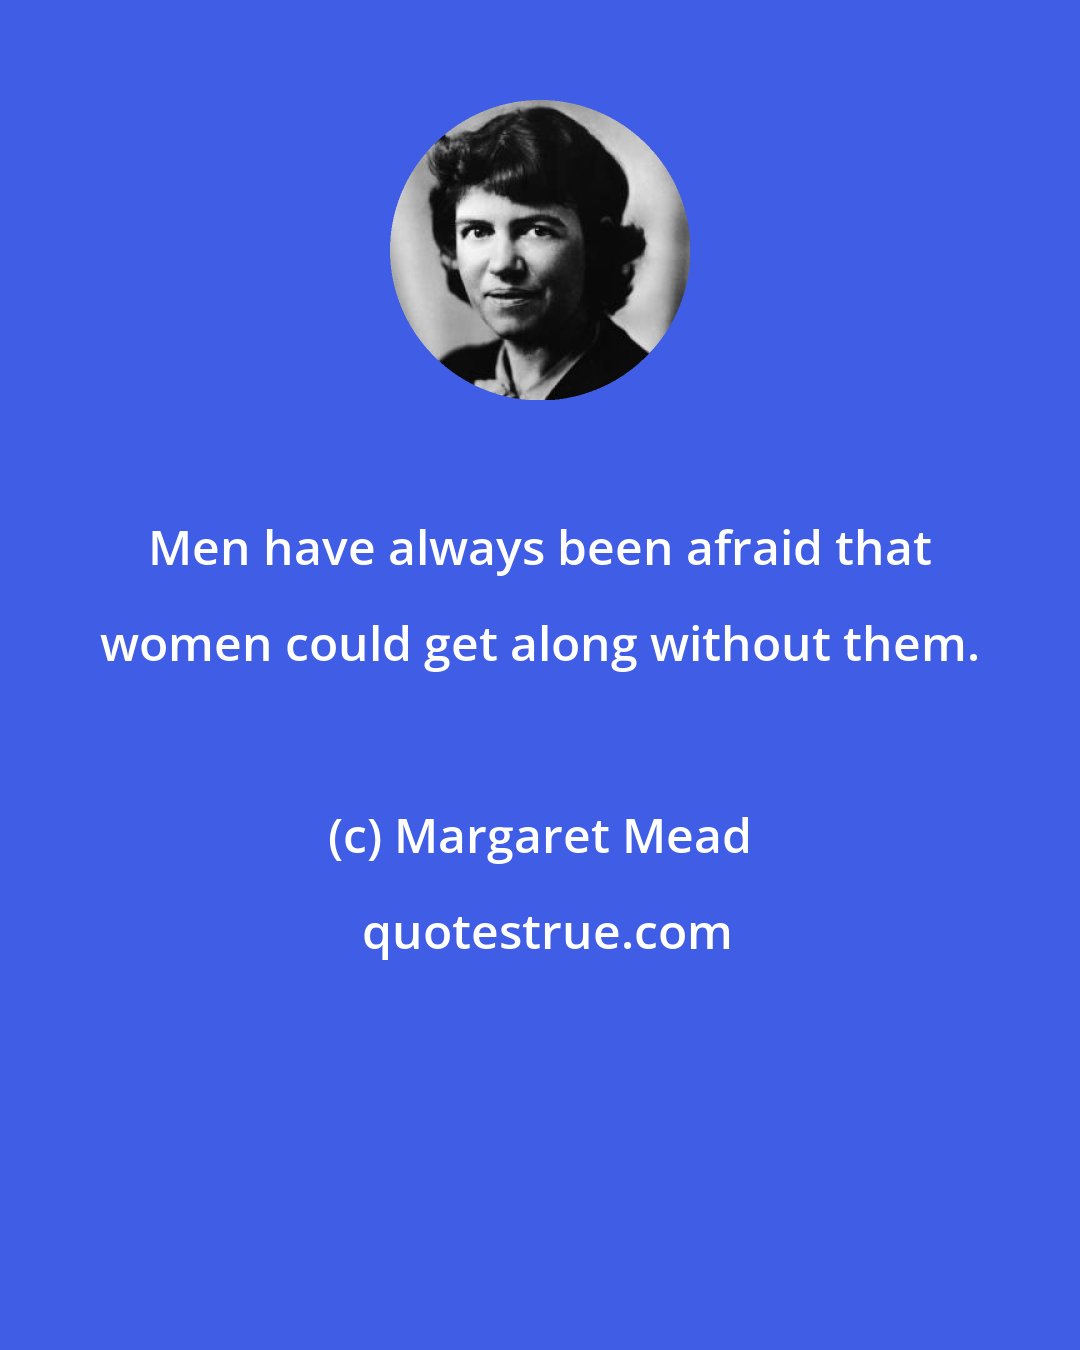 Margaret Mead: Men have always been afraid that women could get along without them.